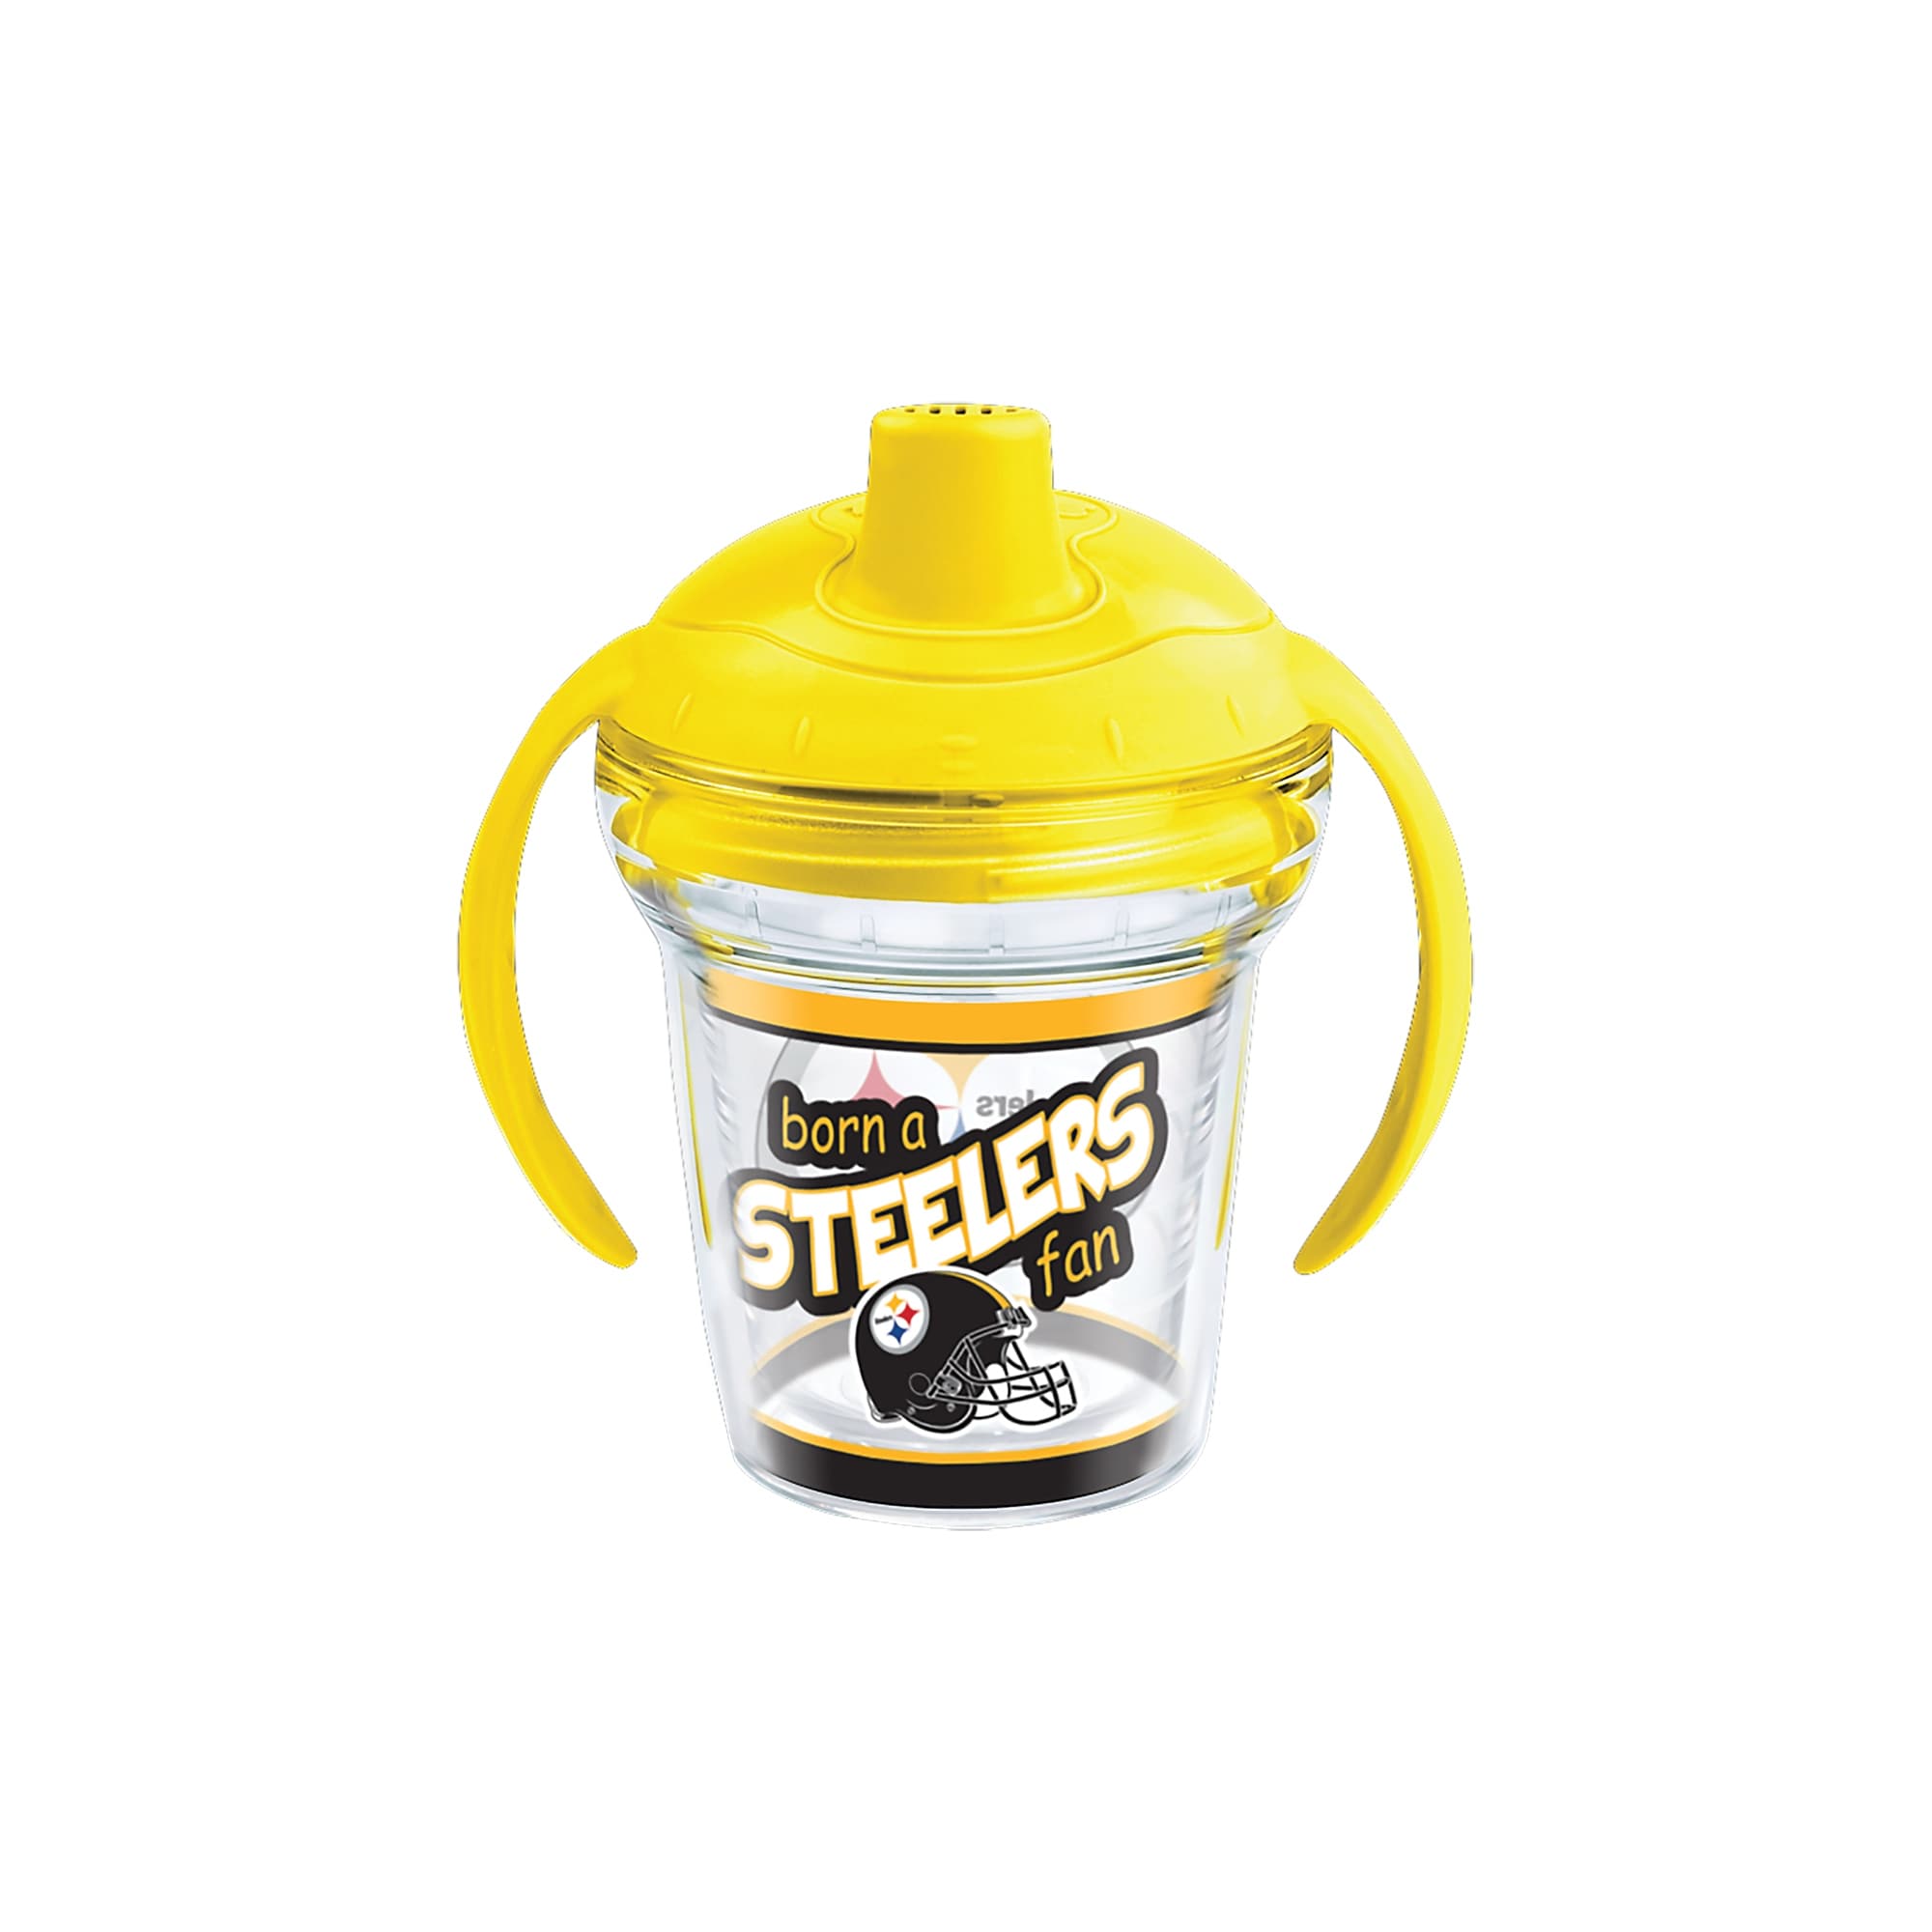 https://ak1.ostkcdn.com/images/products/is/images/direct/a0b11fa6cd9347d1ea326b9b6dee63b3e52a2707/NFL-Pittsburgh-Steelers-Born-A-Fan-6-oz-Sippy-Cup-with-lid.jpg